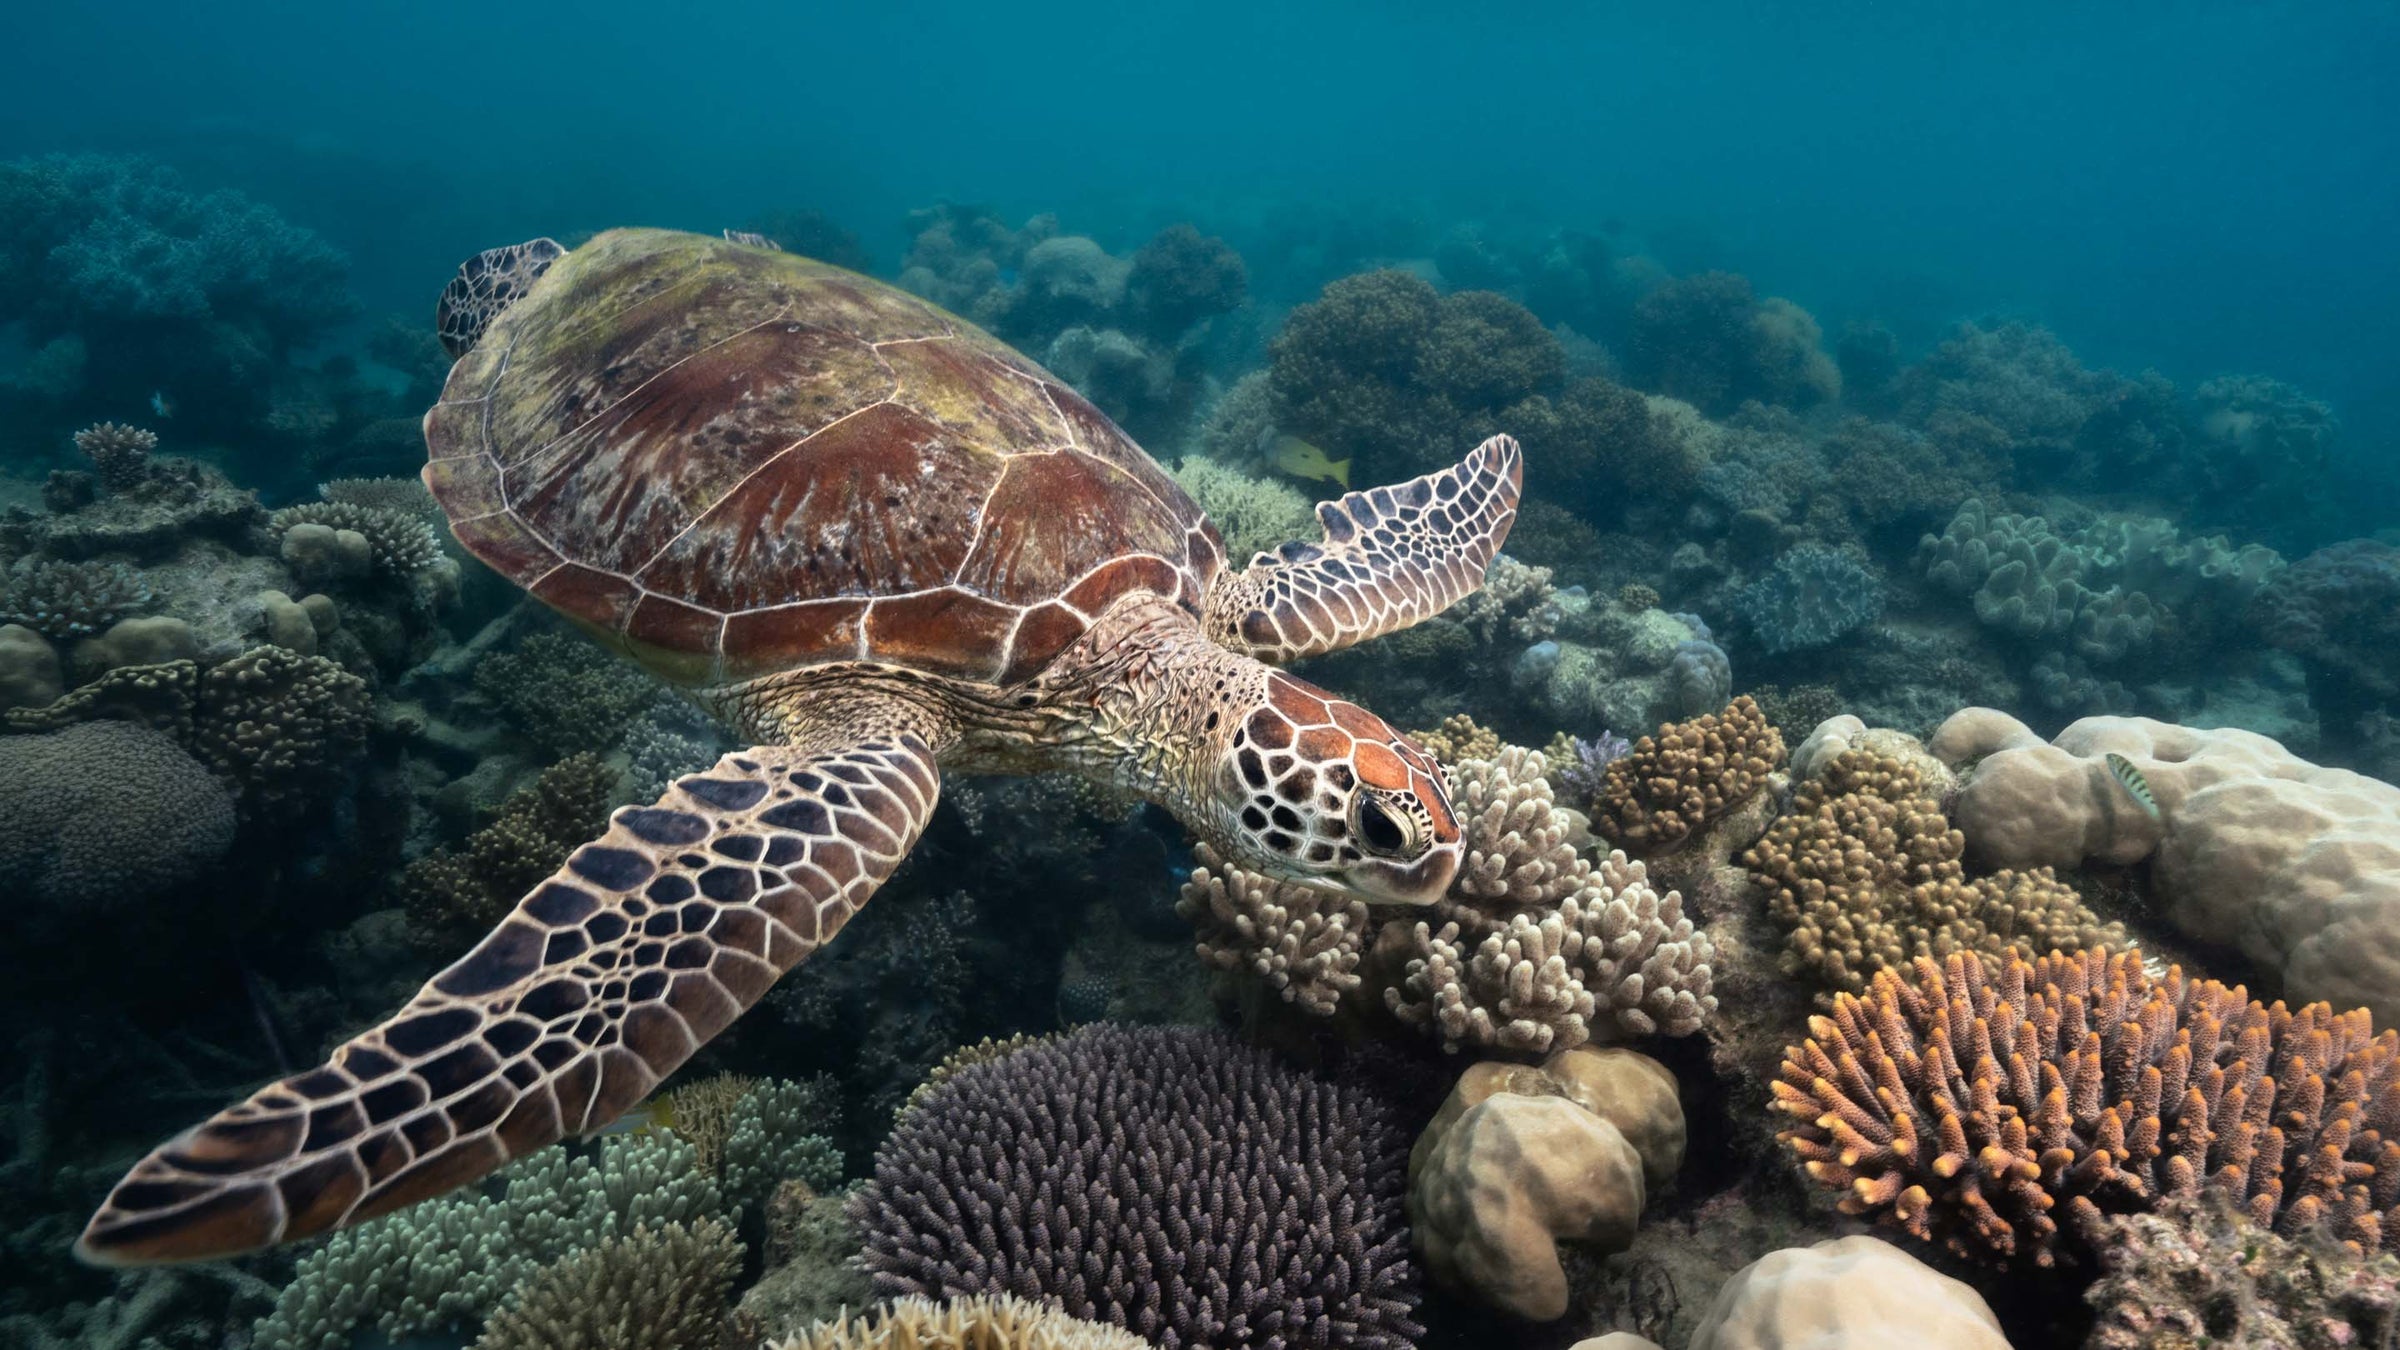 turtle swimming over coral garden at mackay cay on the great barrier reef